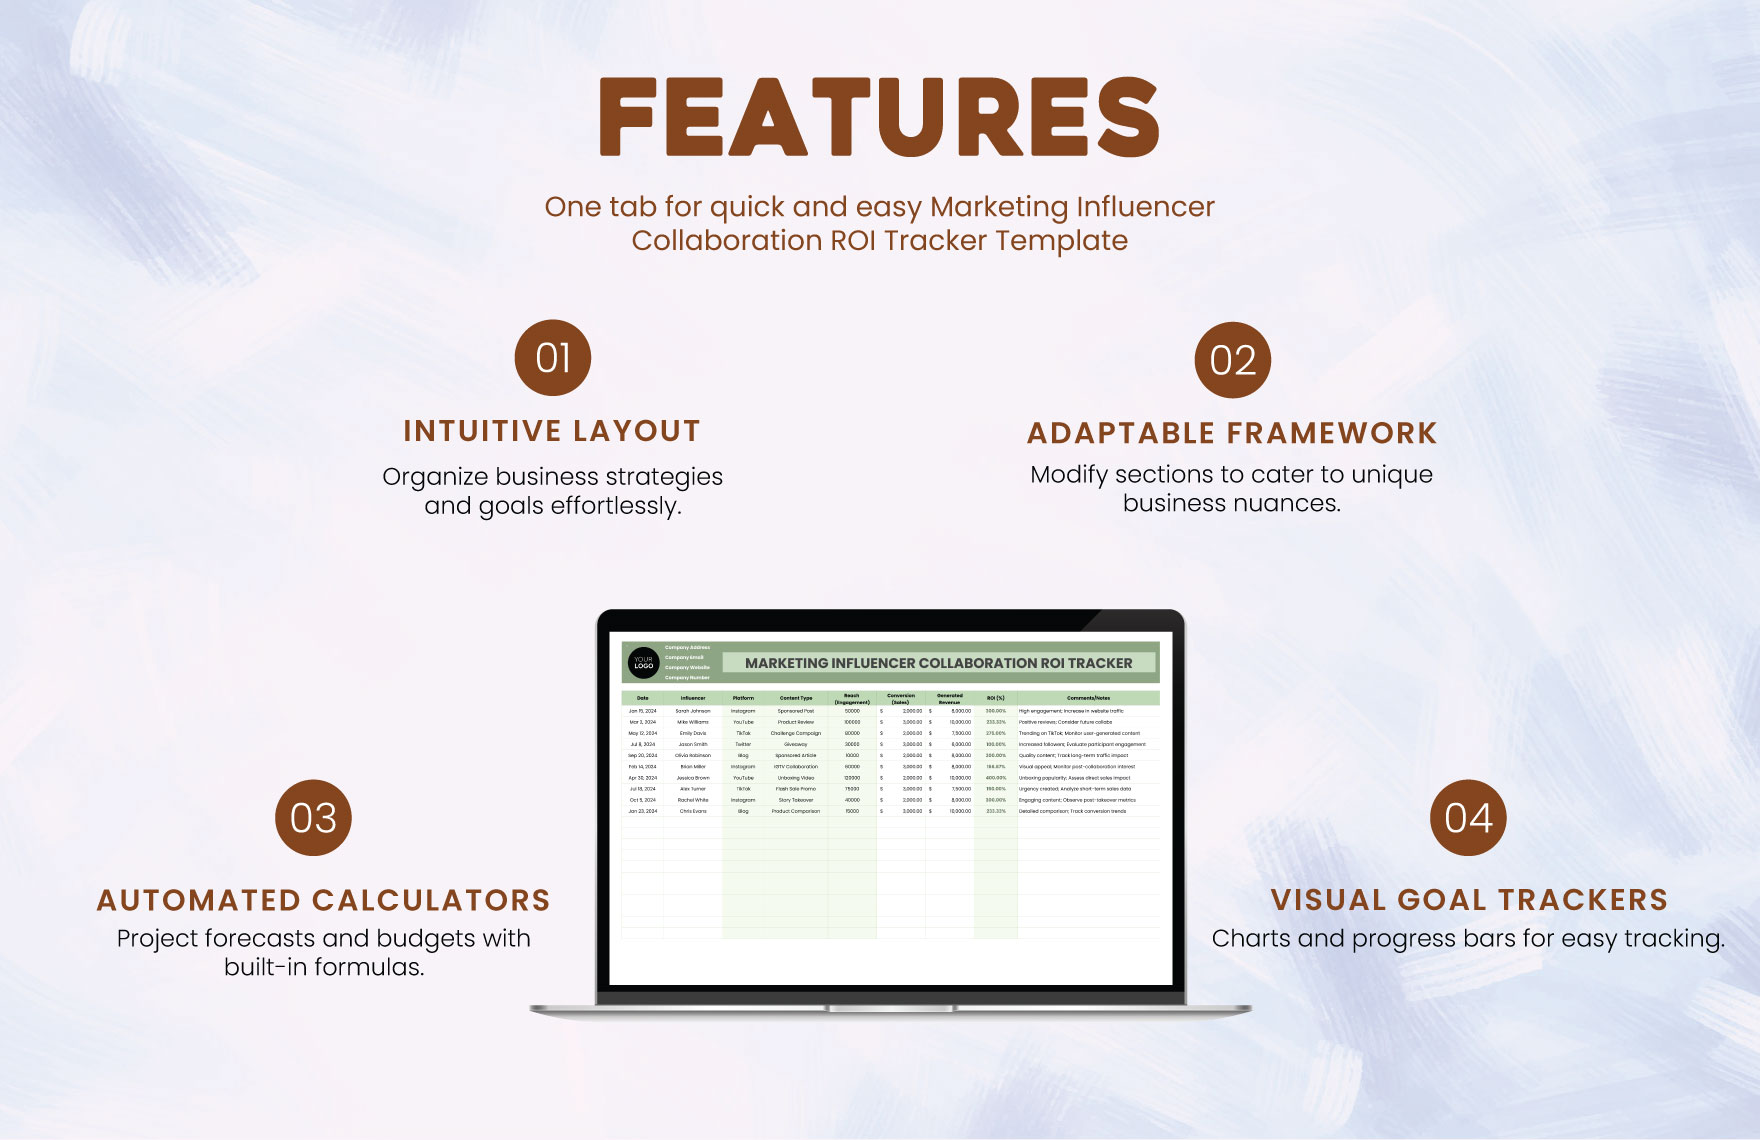 Marketing Influencer Collaboration ROI Tracker Template